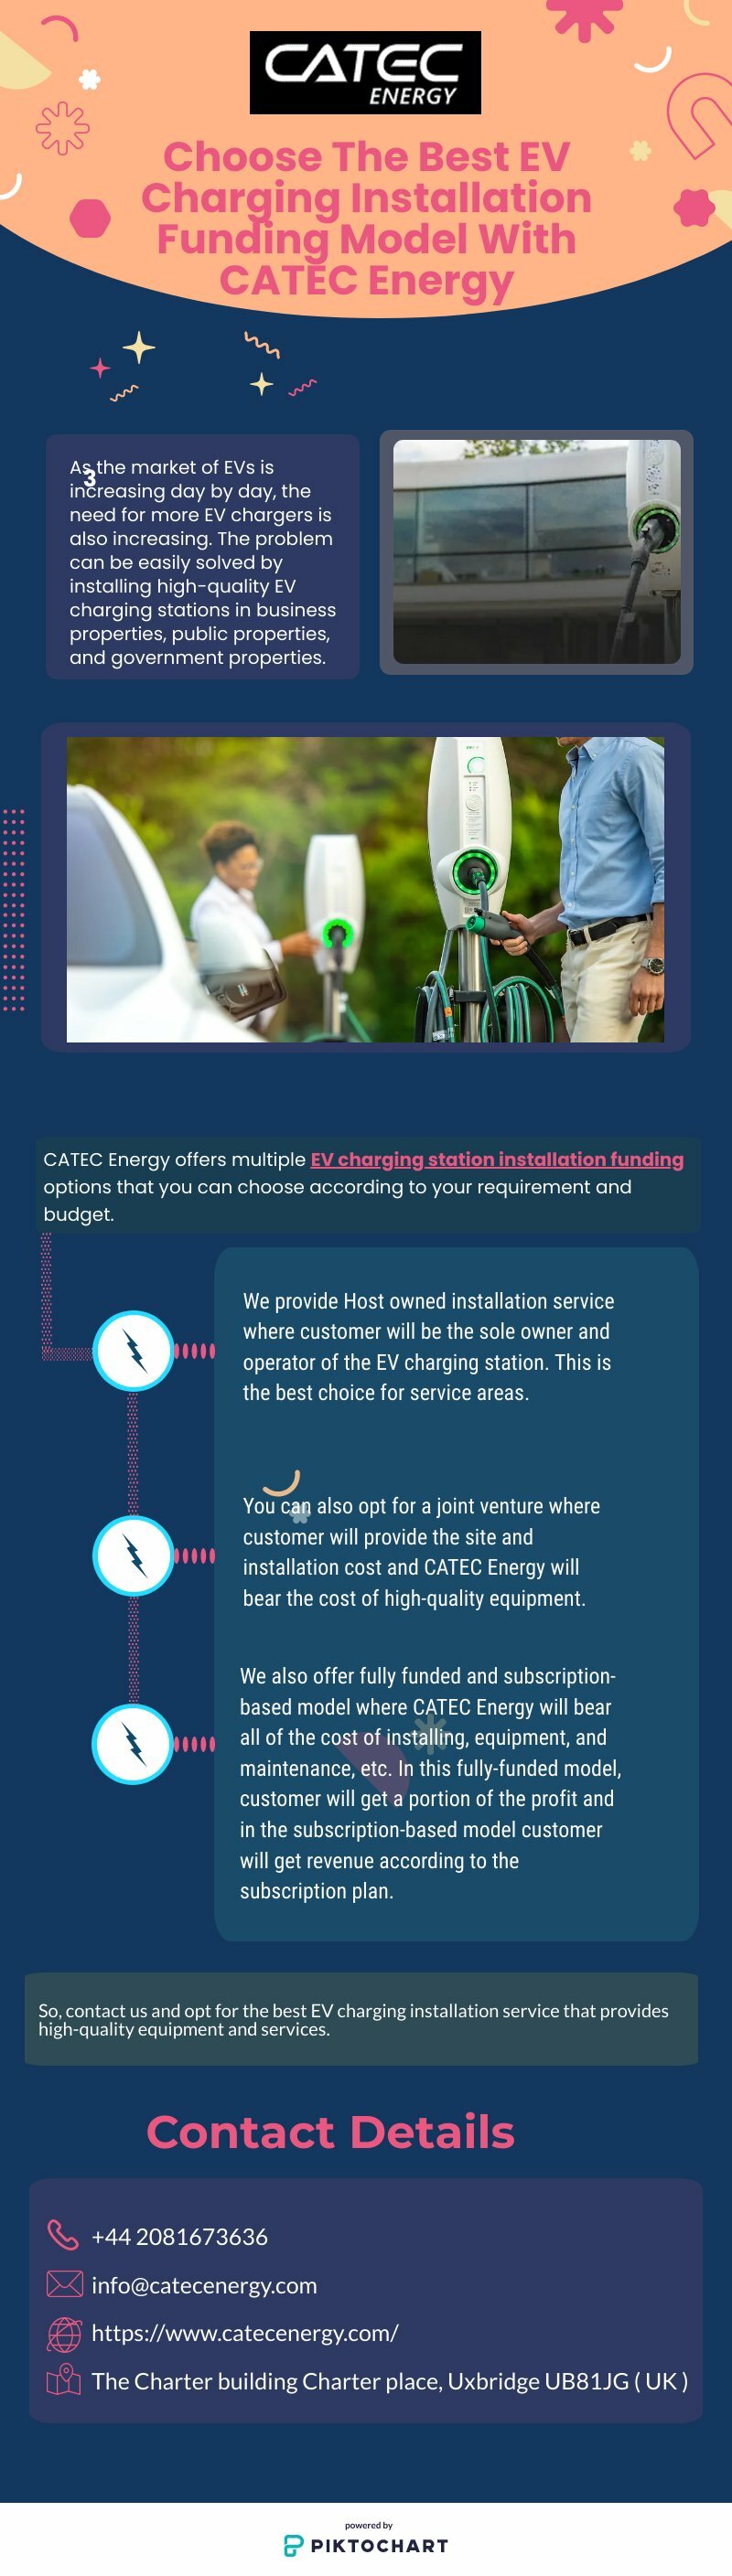 Choose the Best EV Charging Installation Funding Model With CATEC Energy